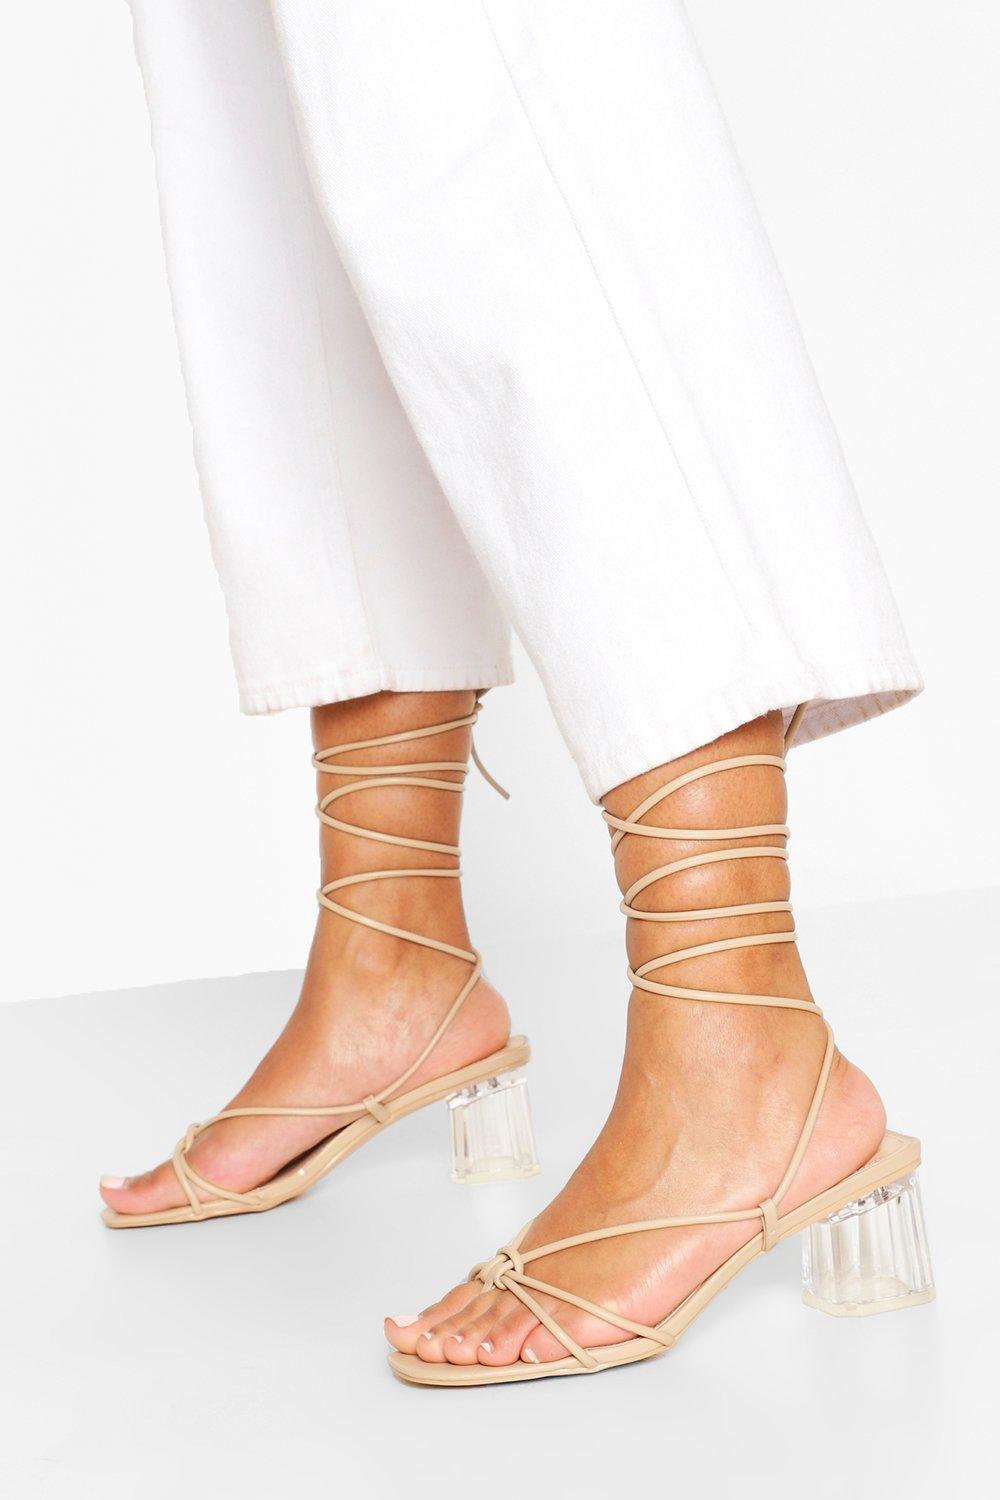 Strappy Clear Low Heel Sandals | boohoo